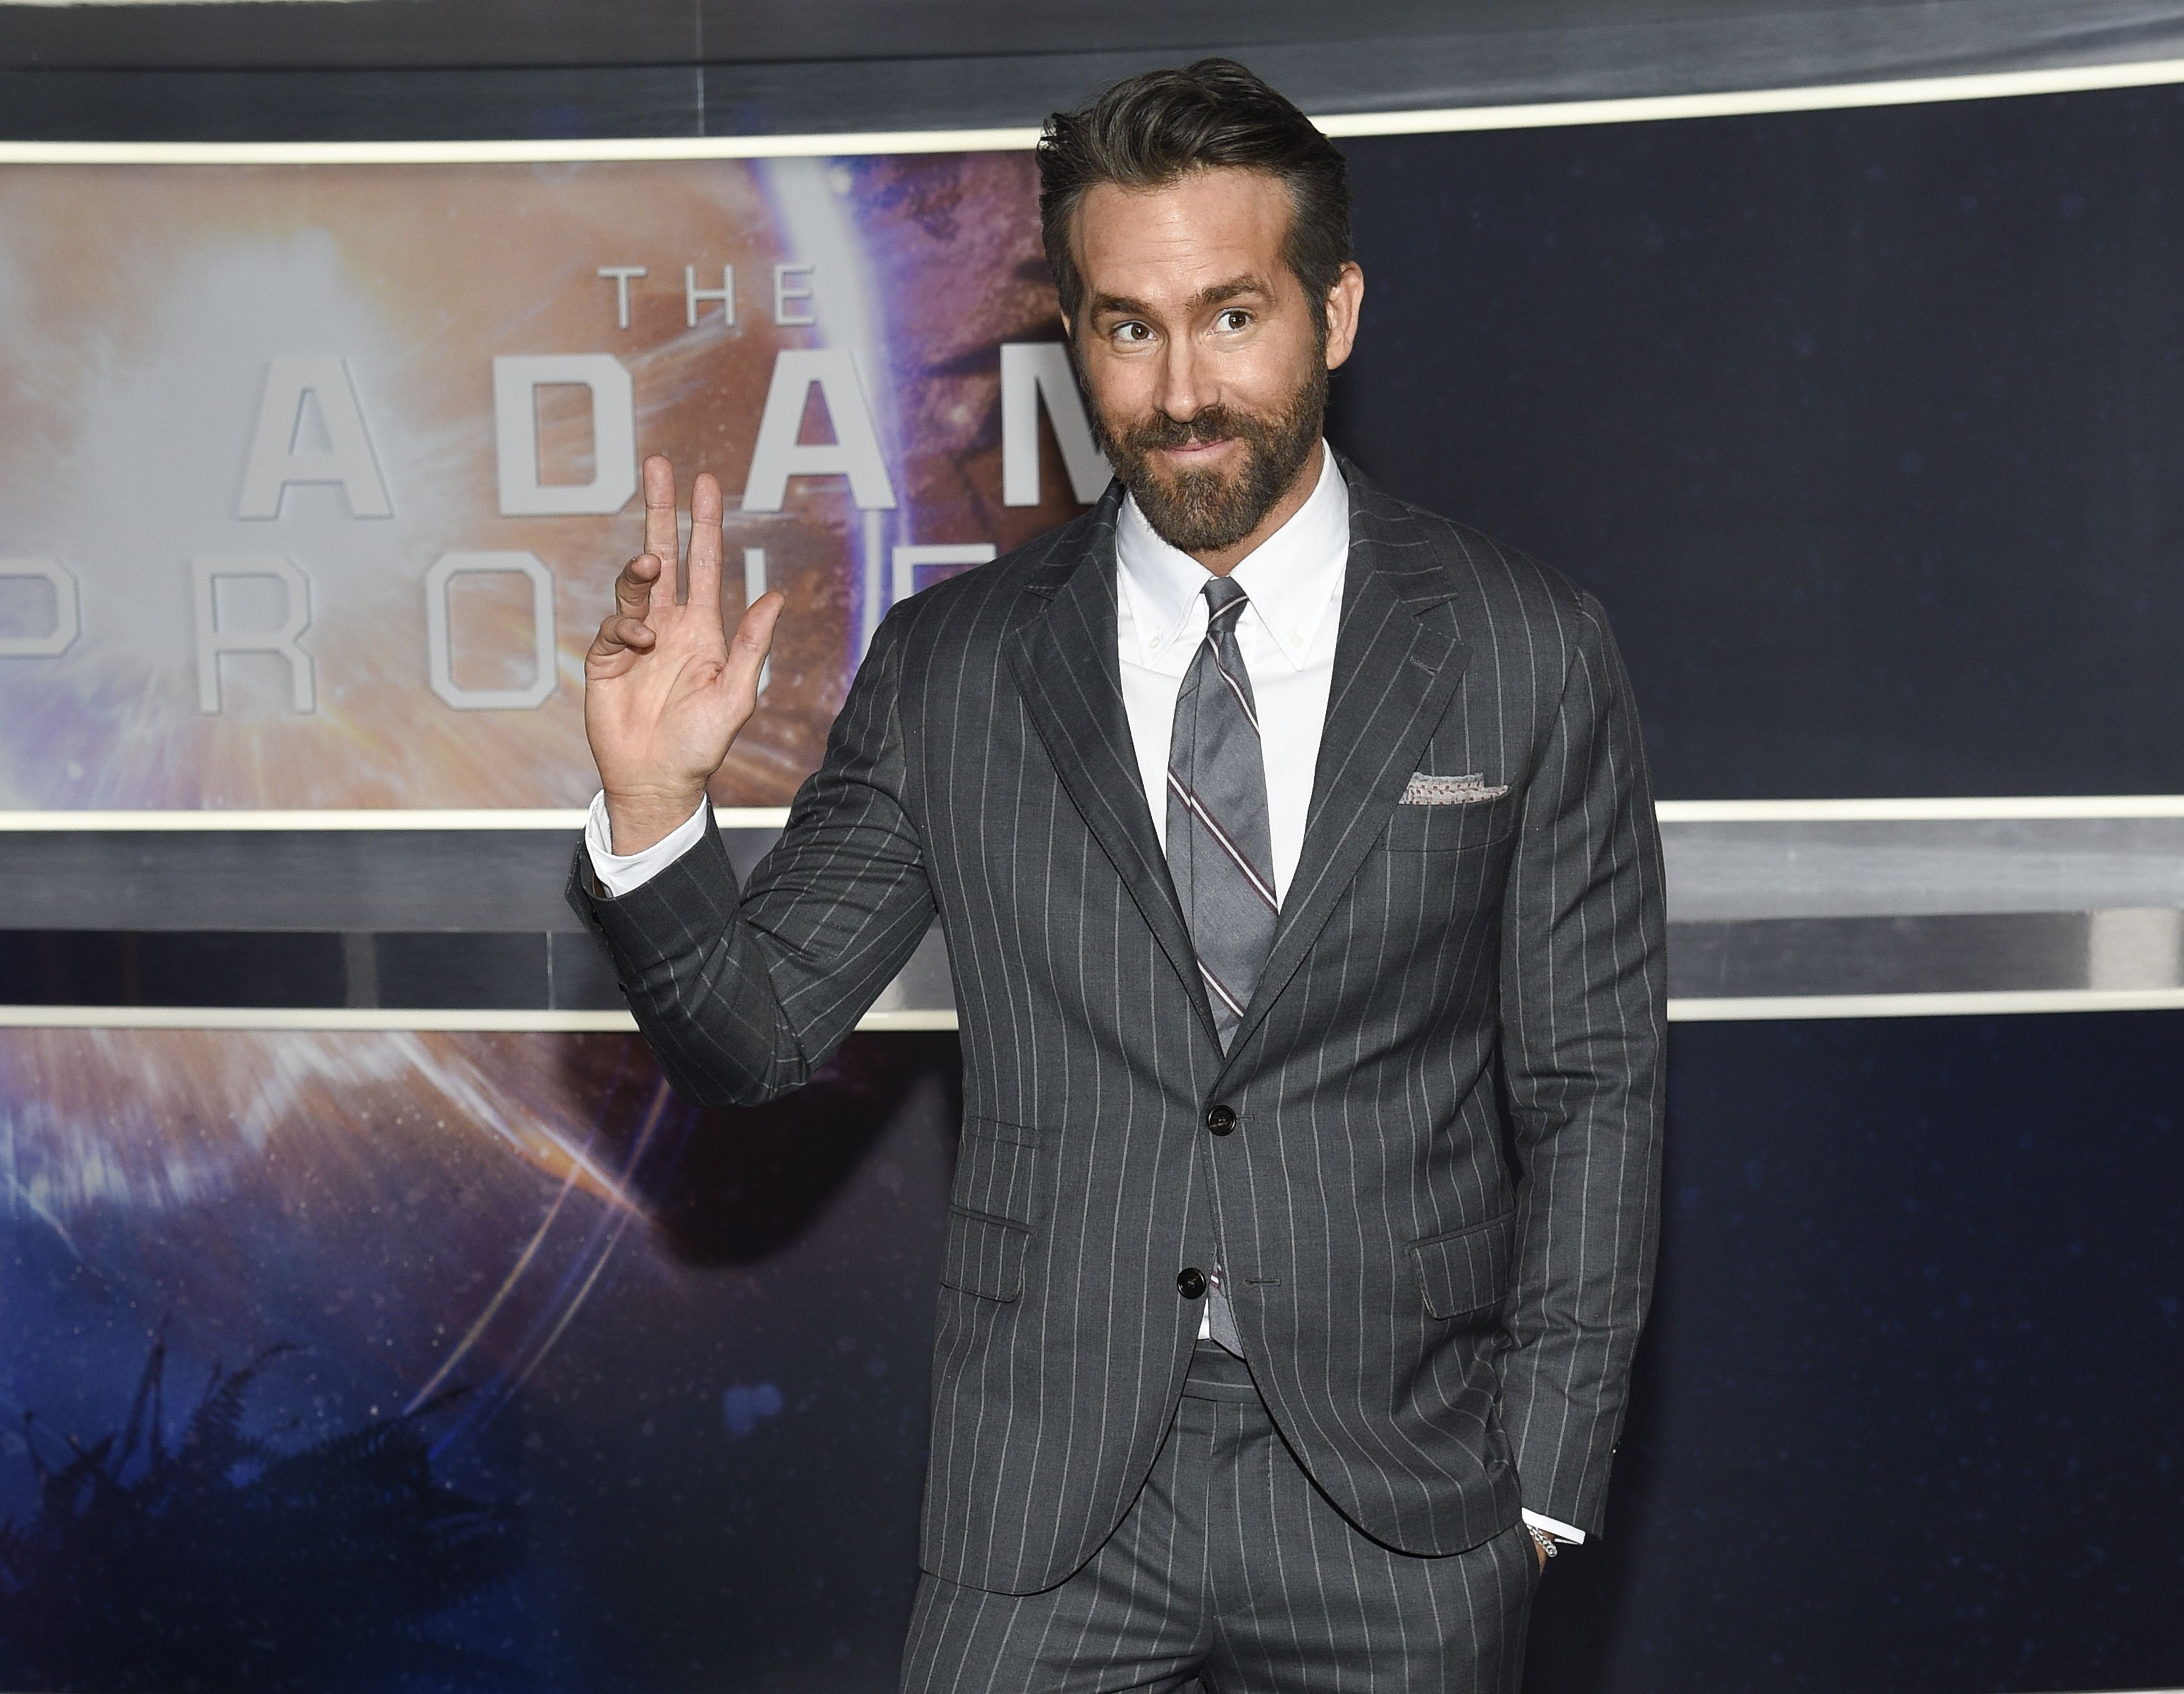 Disney+ goes R-rated with 'Deadpool,' and Ryan Reynolds has